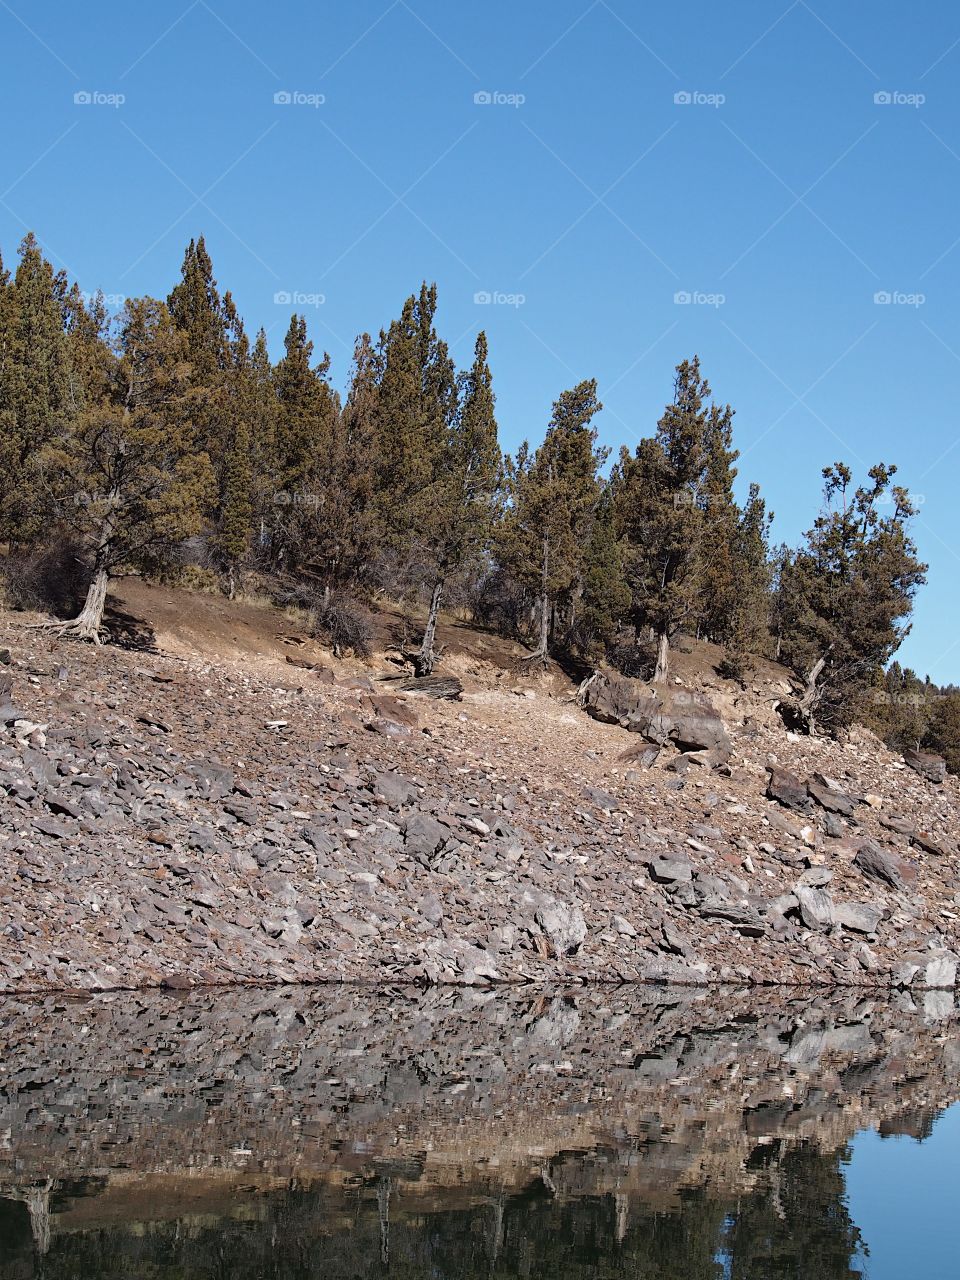 Trees and rocks on the steep slopes of the shores of Ochoco Reservoir in Central Oregon reflect in the glasslike waters on a beautiful sunny spring day with clear blue skies. 